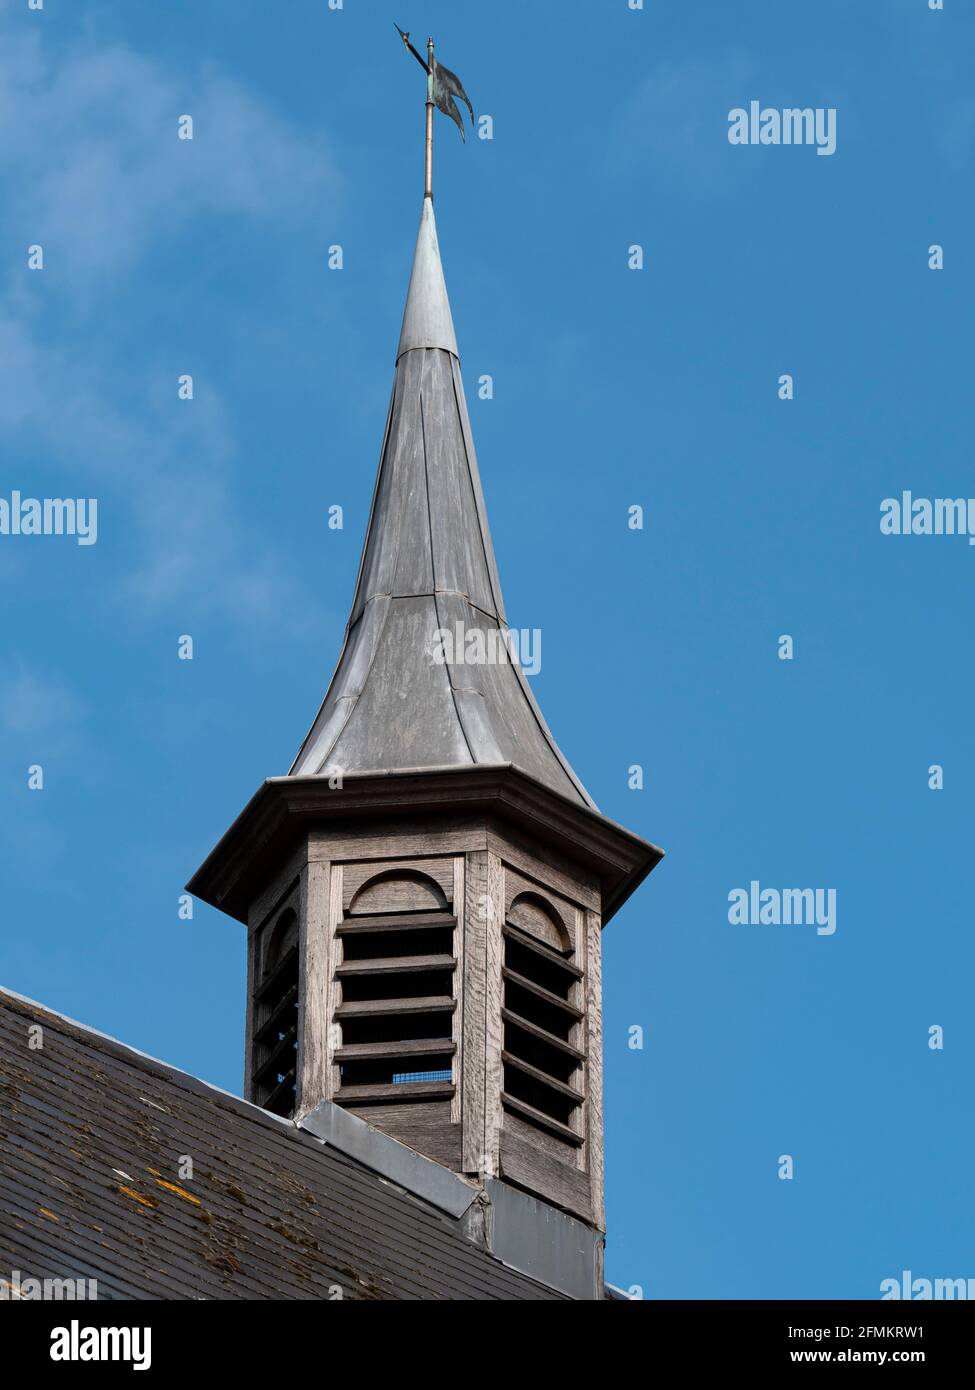 Old wooden turret with a lead roof and a blue sky as a background Stock Photo